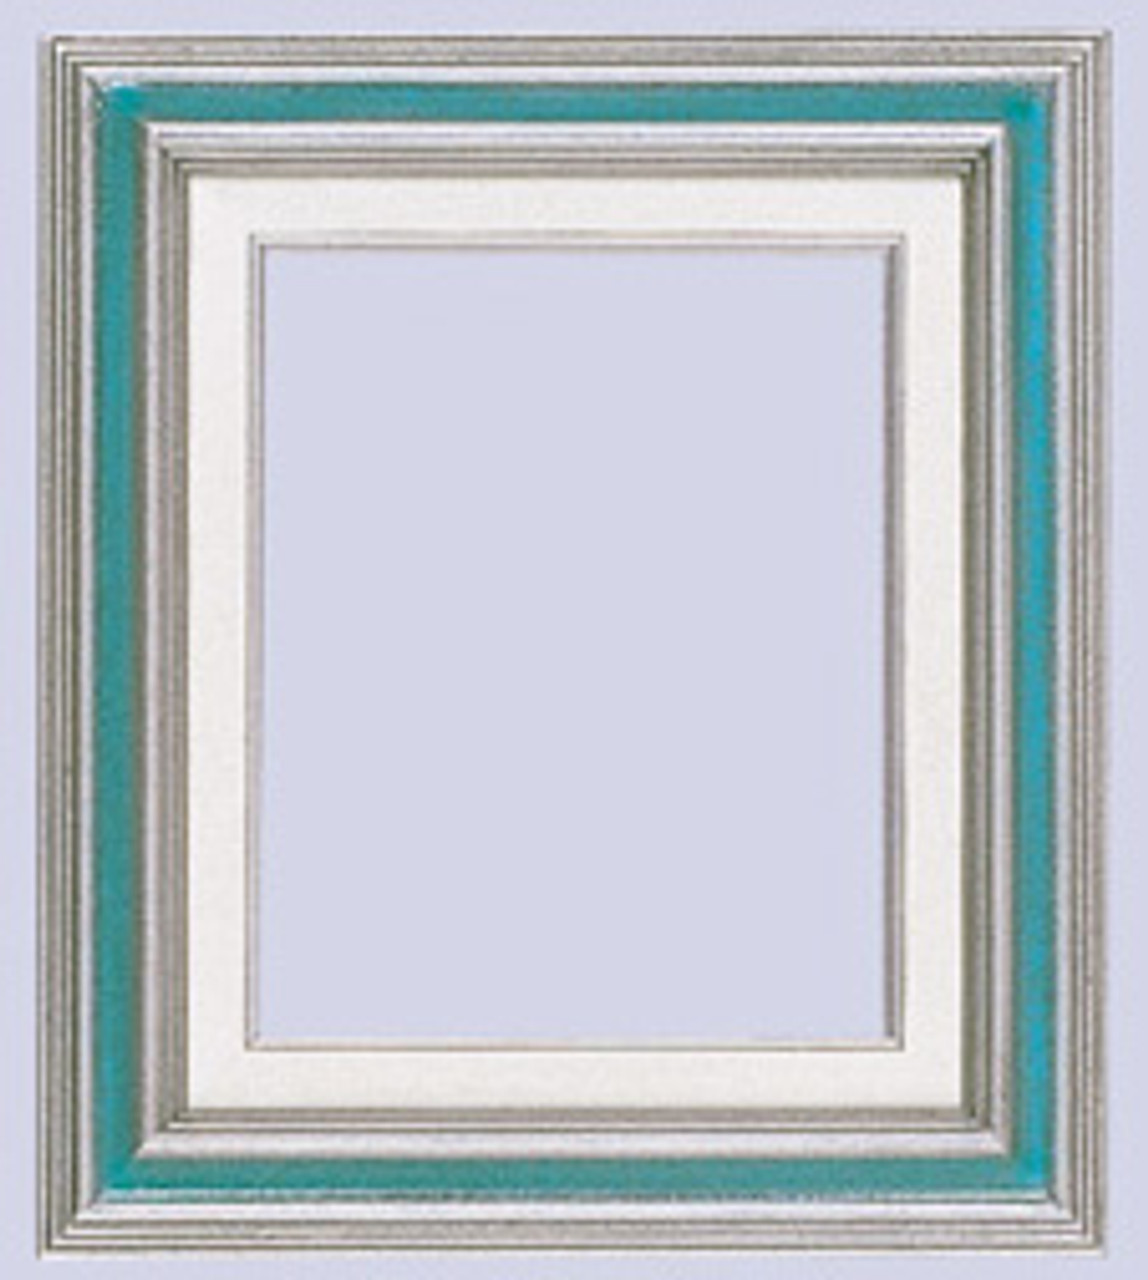  3 Inch Econo Wood Frames With Linen Liners: 24X24*